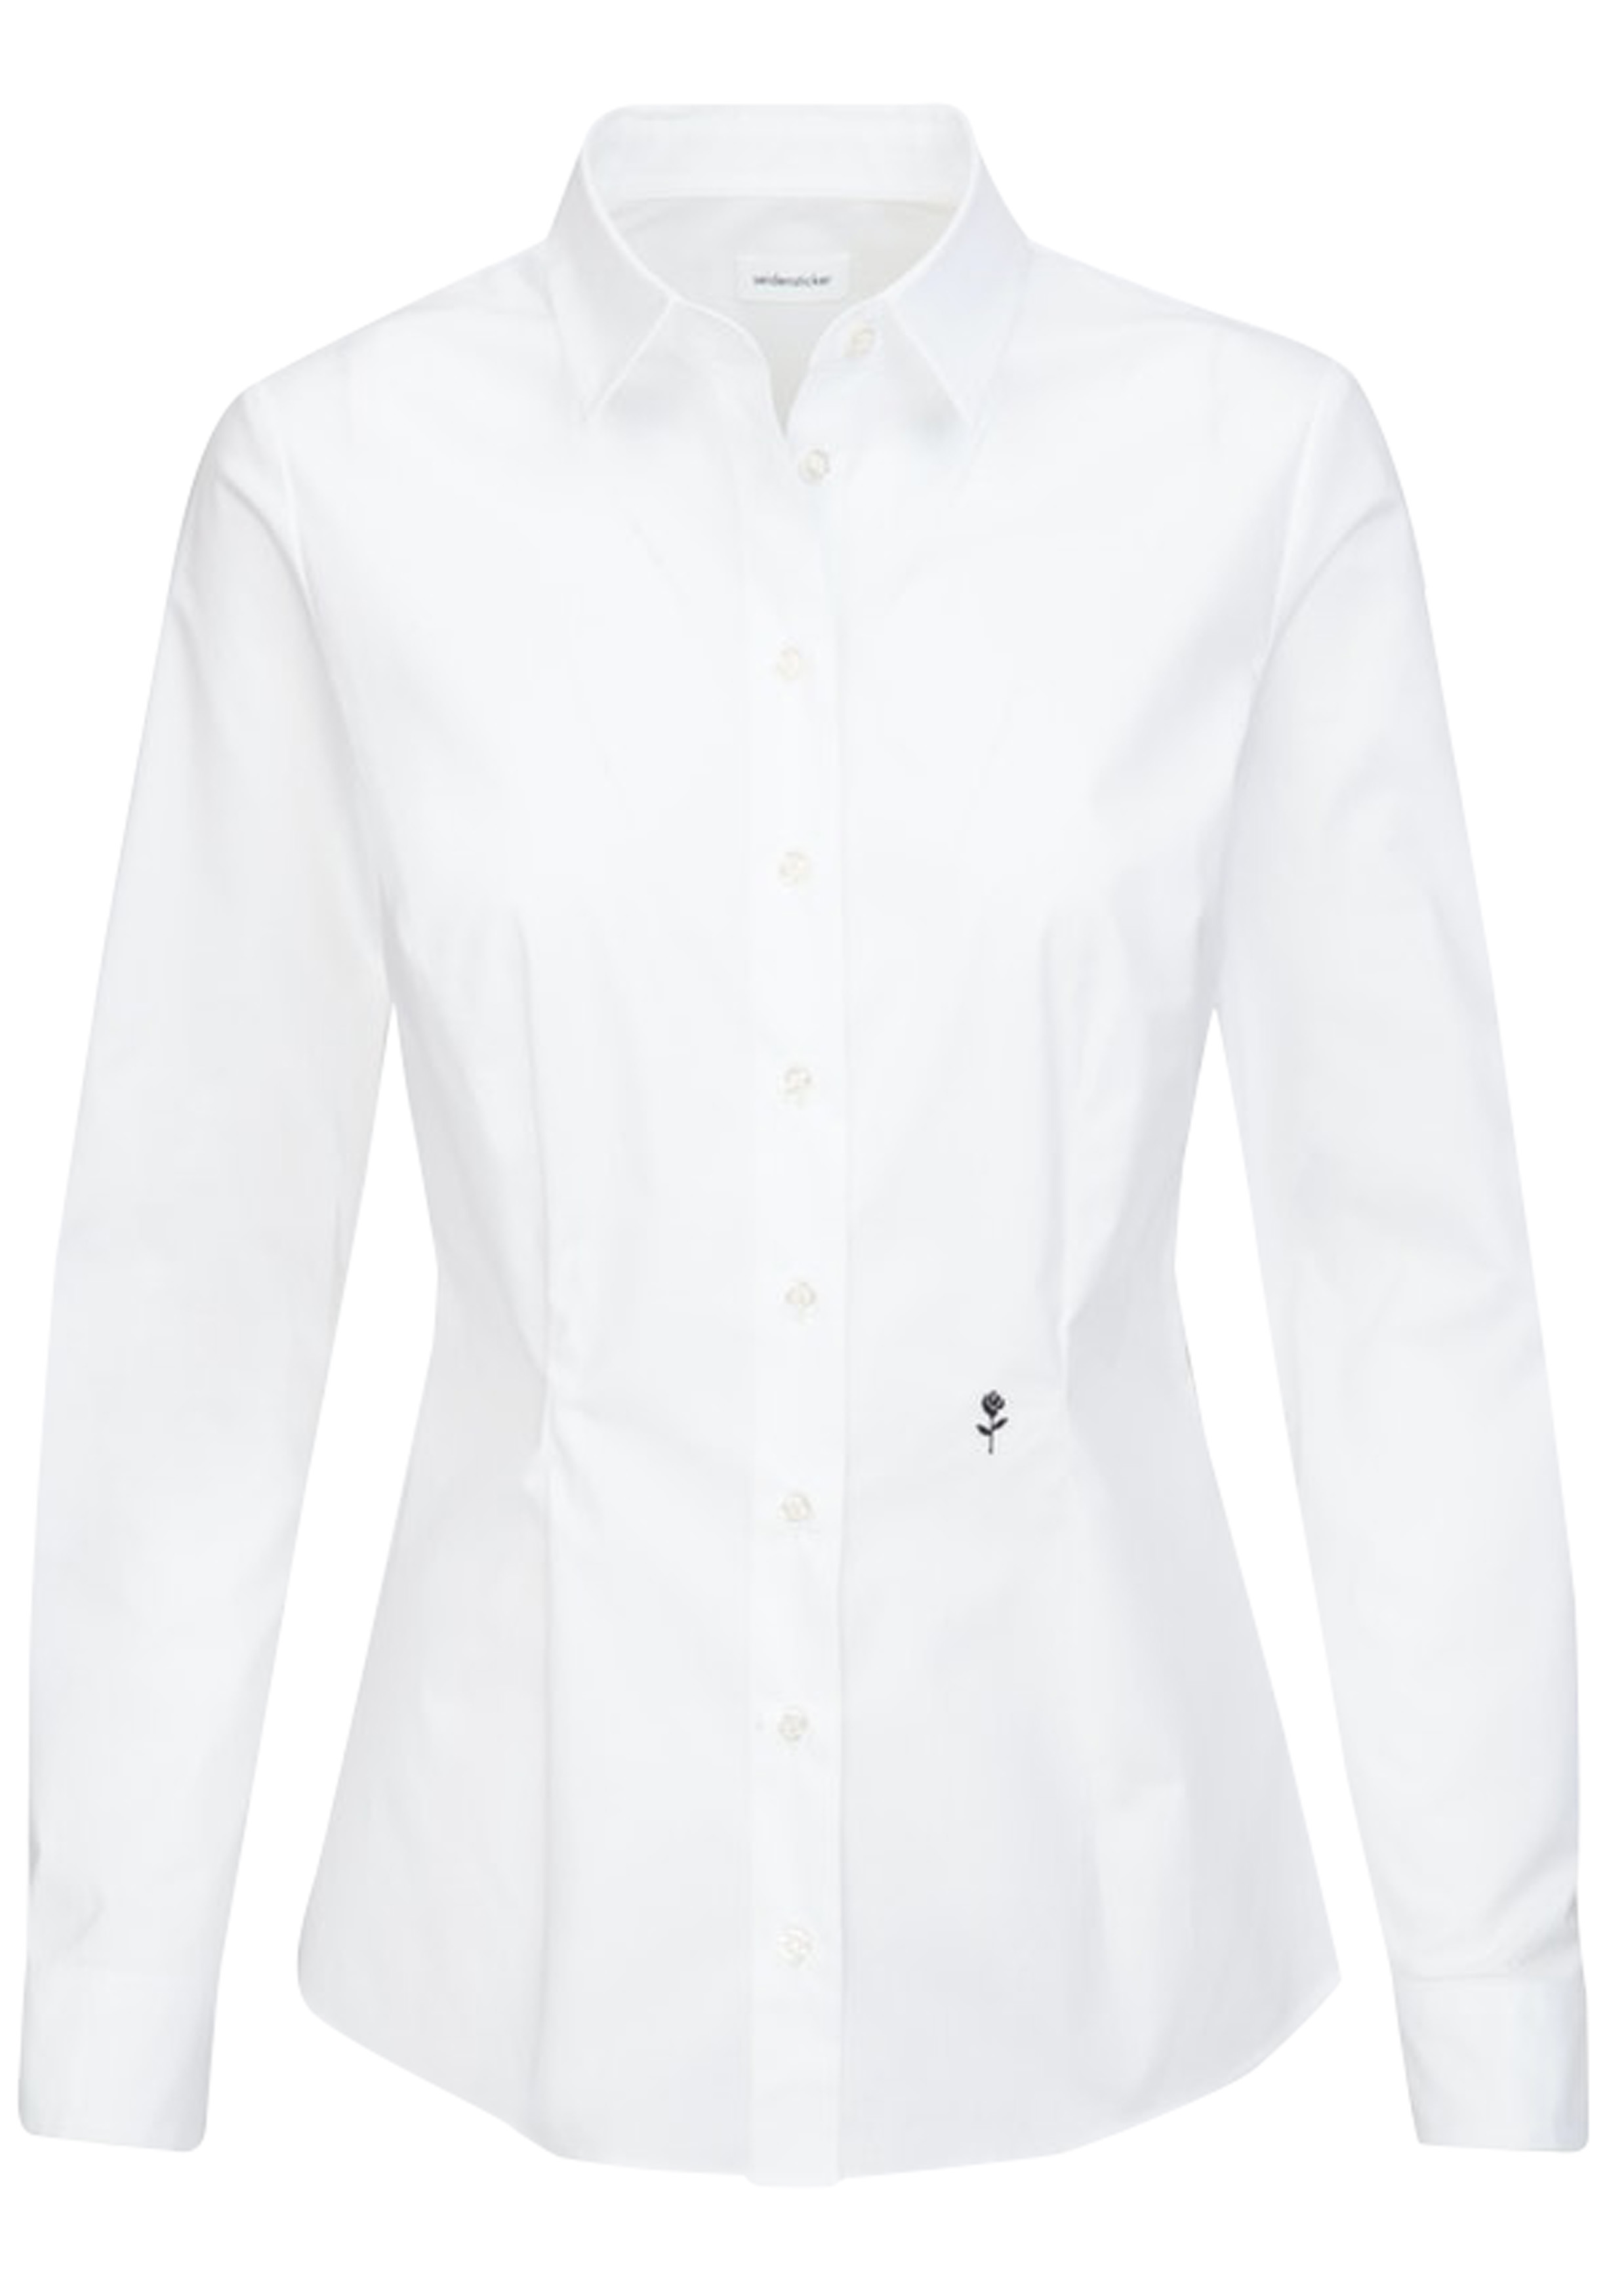 dames blouse slim fit, stretch, wit - Zomer SALE tot 50% korting